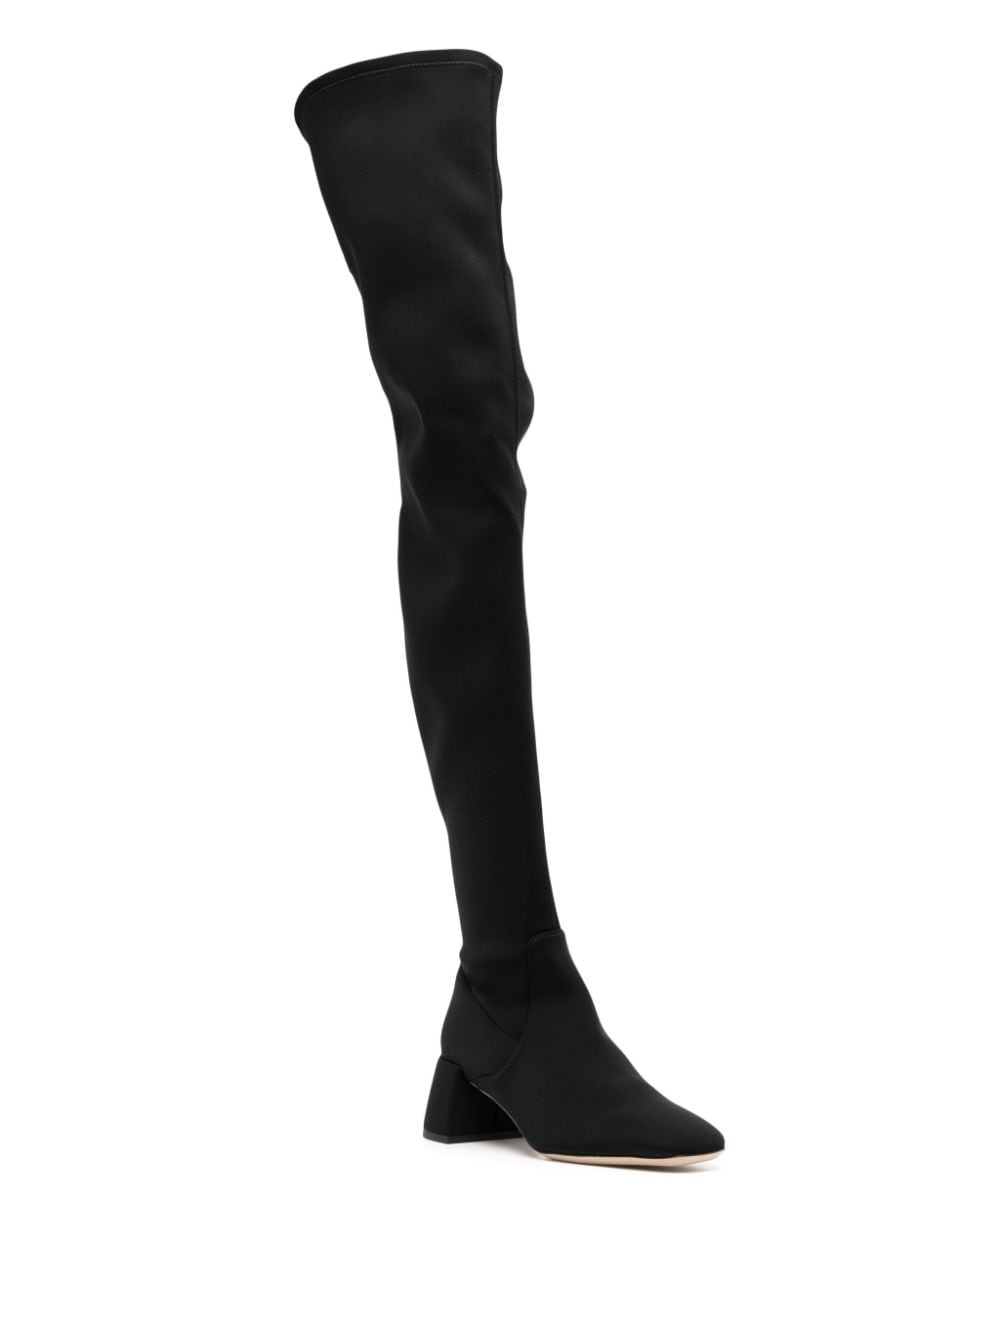 55mm over-the-knee boots - 2